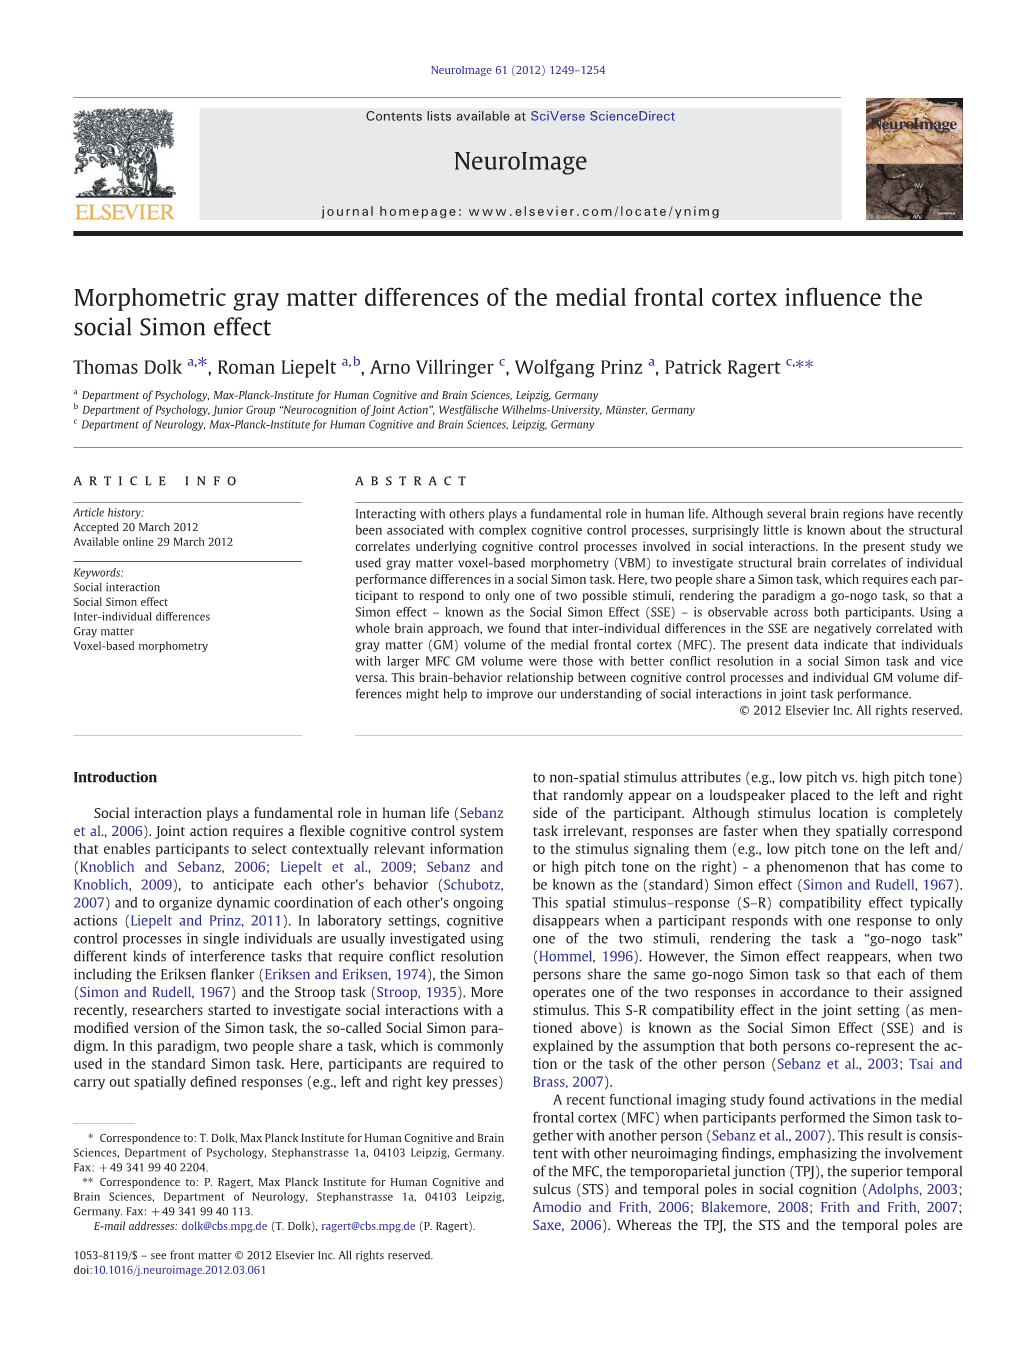 Morphometric Gray Matter Differences of the Medial Frontal Cortex Inﬂuence the Social Simon Effect